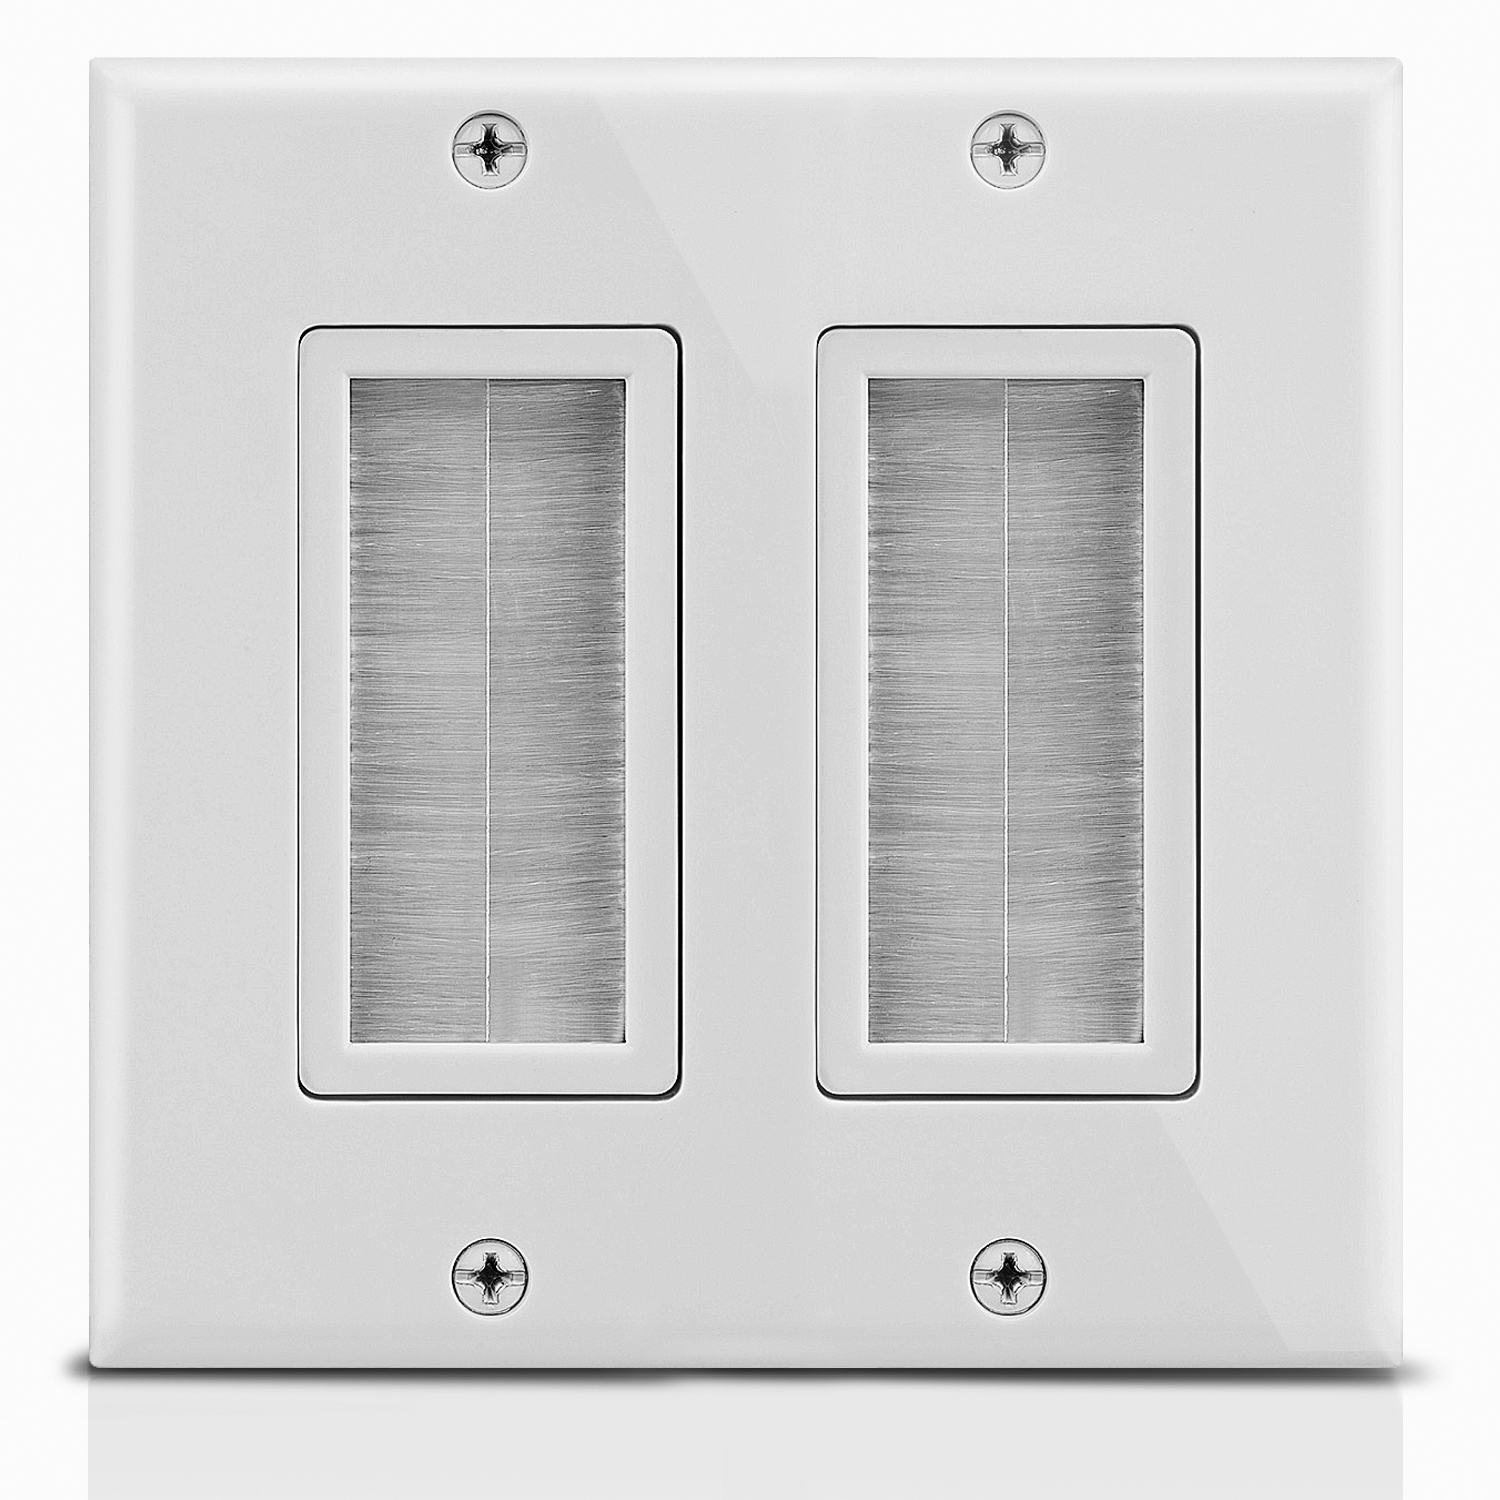 Fosmon 2-Gang Wall Plate, Brush Style Opening Passthrough Low Voltage Cable Plate in-Wall Installation for Speaker Wires, Coaxial Cables, HDMI Cables, or Network/Phone Cables - image 1 of 8